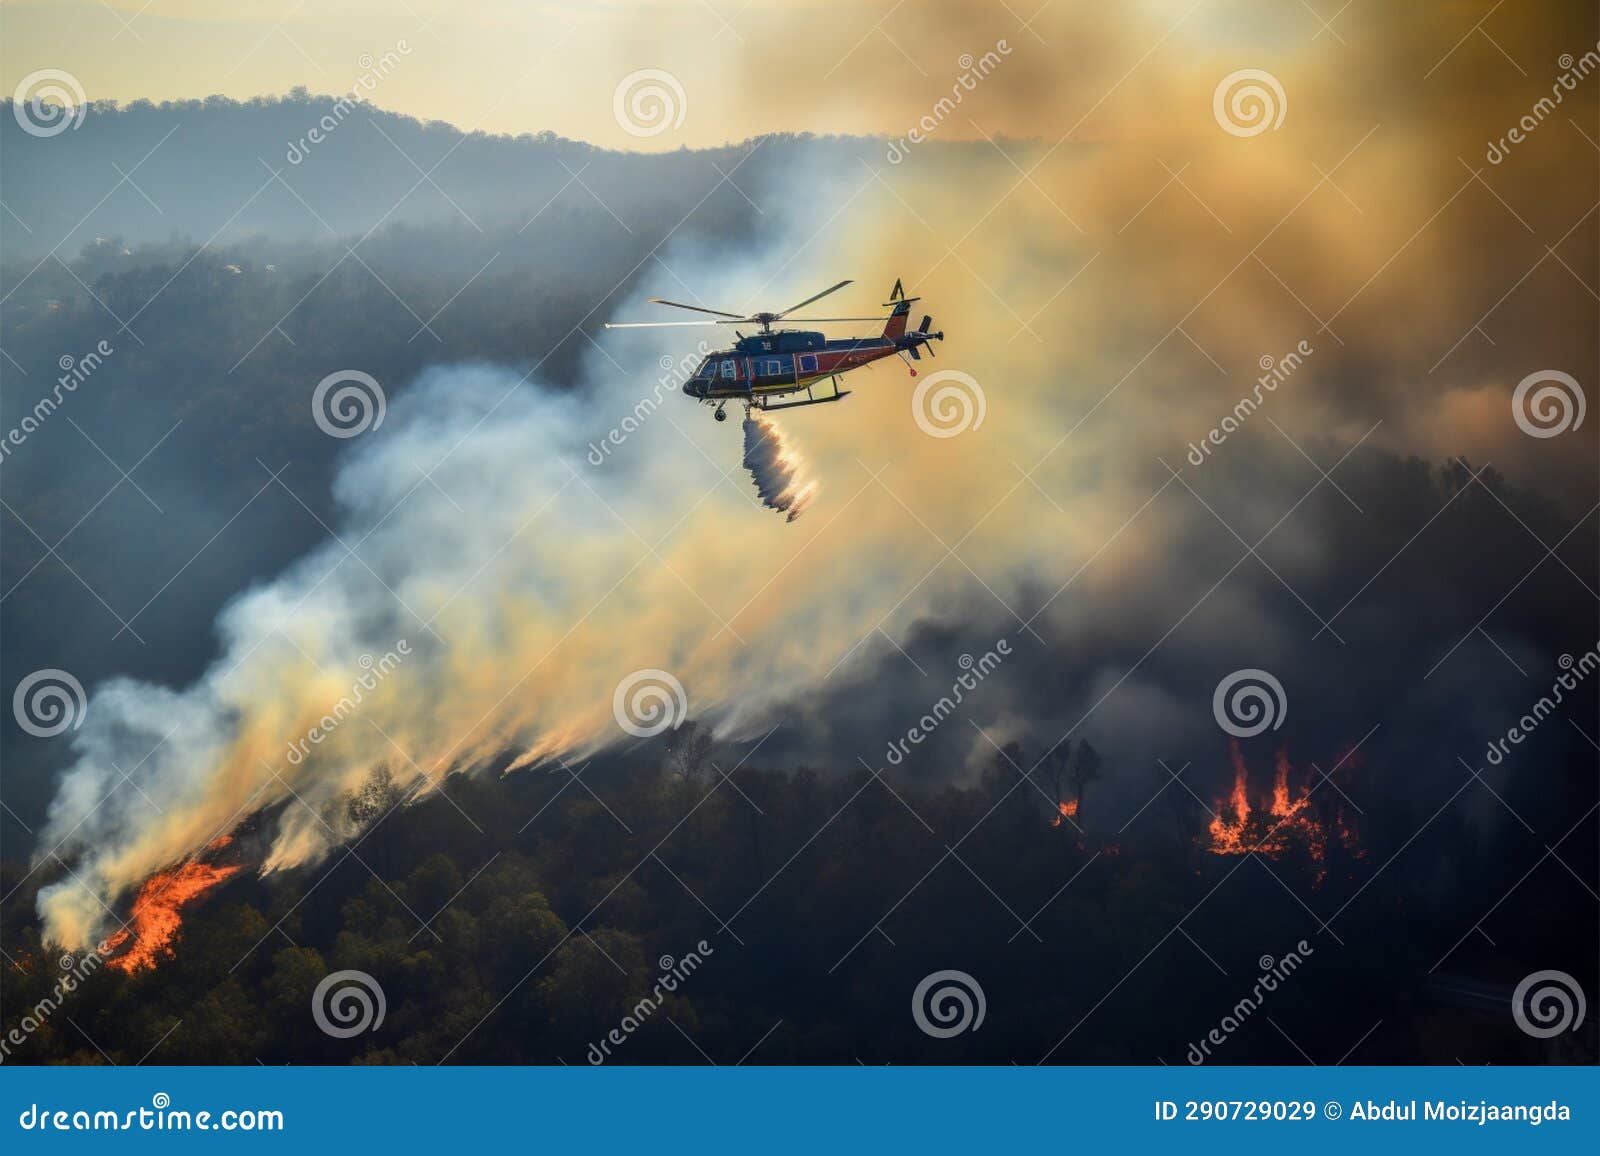 aerial firefighting helicopter releases water to combat a fierce wildfire